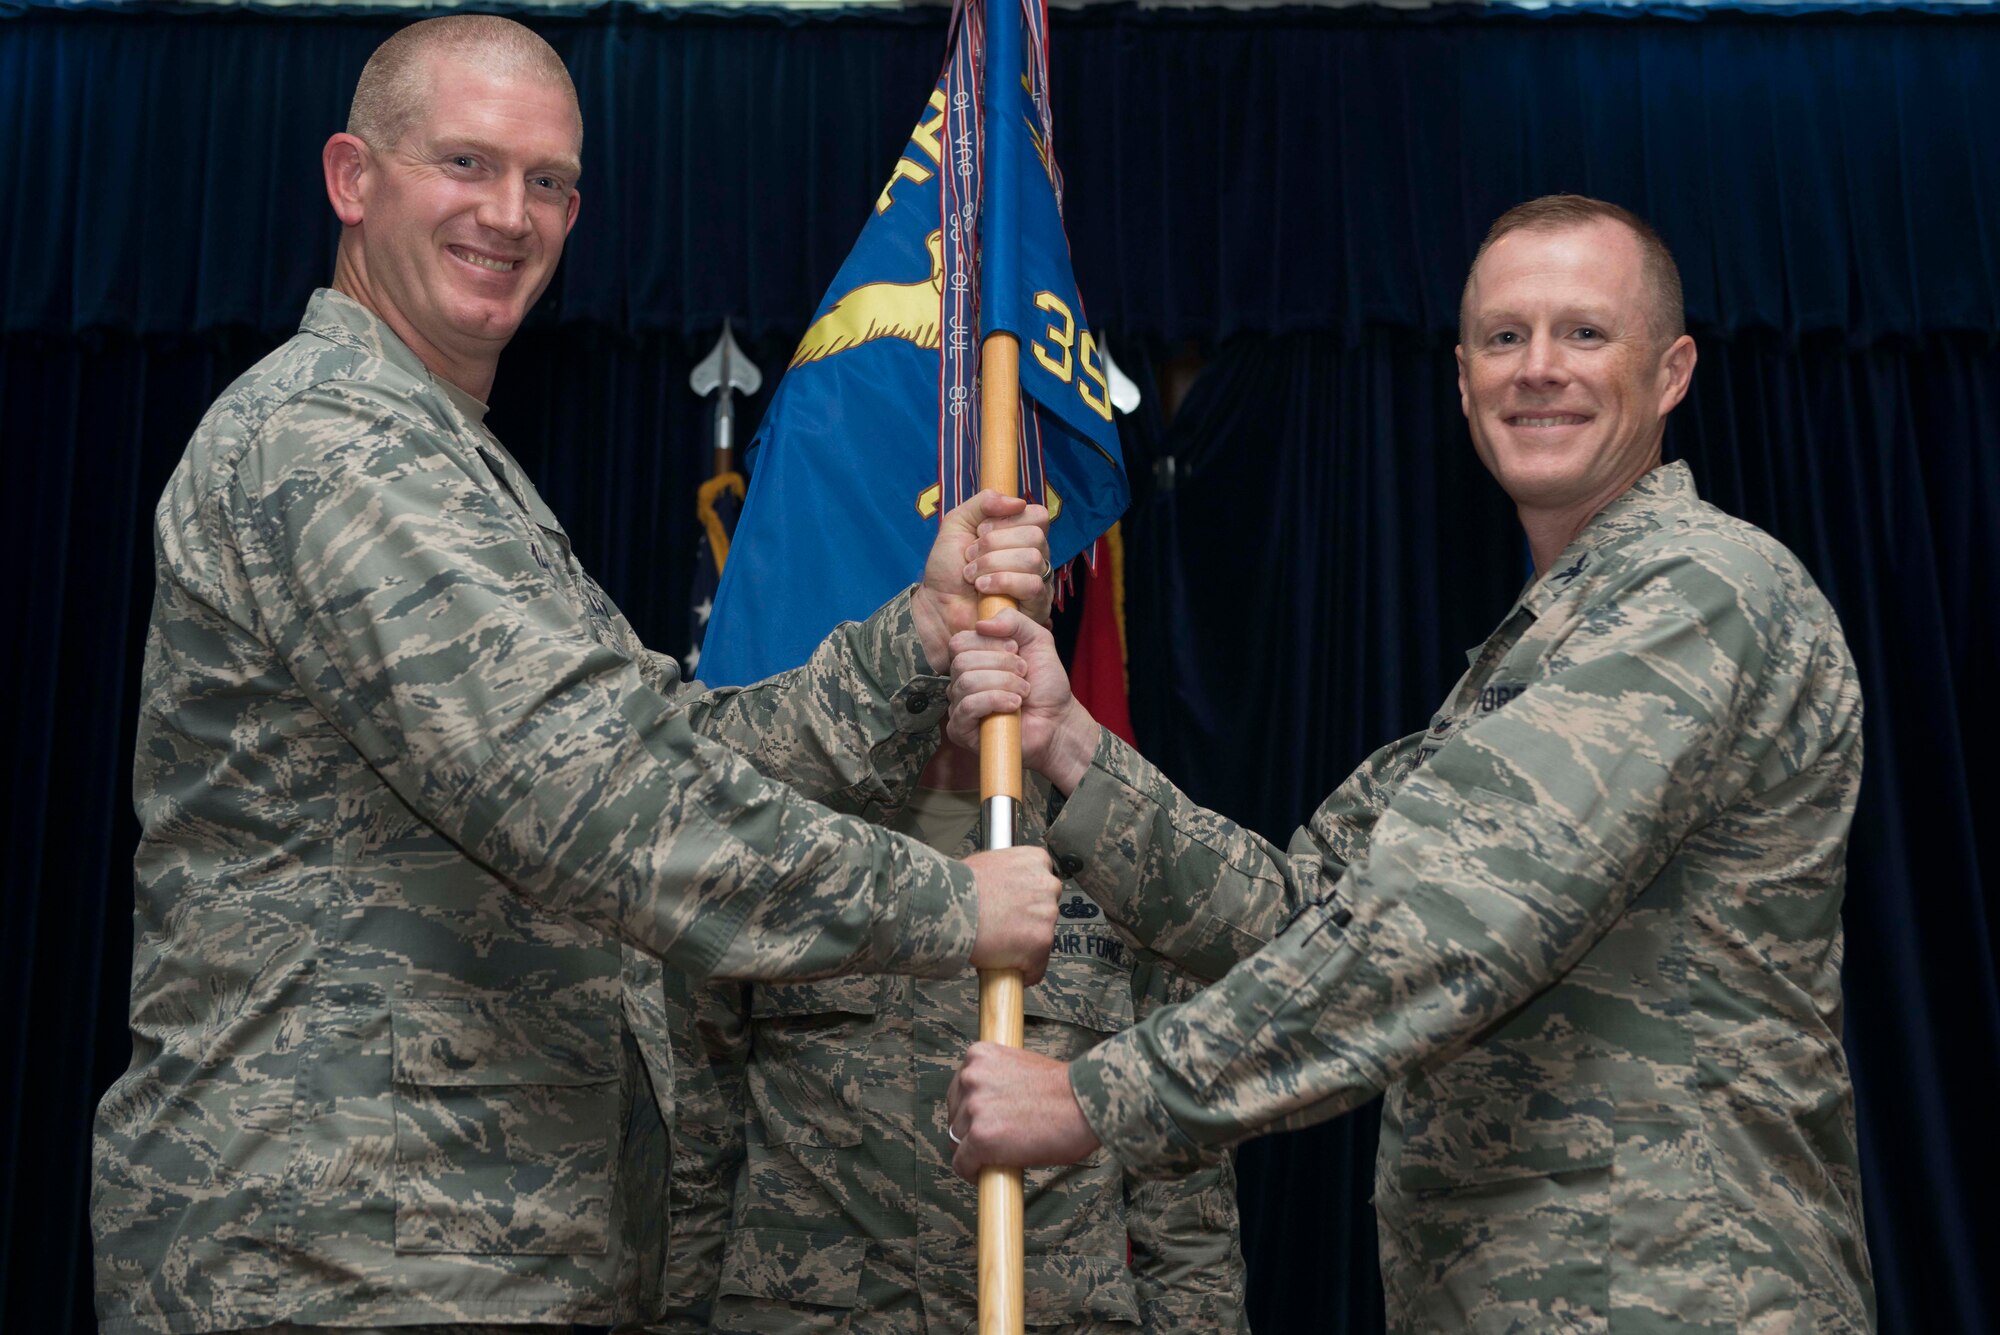 U.S. Air Force Col. Todd Stratton, 39th Mission Support Group incoming commander, receives command from U.S. Air Force Col. John Walker, 39th Air Base Wing commander, during a change of command ceremony July 8, 2016, at Incirlik Air Base, Turkey. Prior to taking command, Stratton was the chief of defensive cyberspace operations at Headquarters U.S. Special Operations Command, MacDill Air Force Base, Fla. (U.S. Air Force photo by Senior Airman John Nieves Camacho/Released)